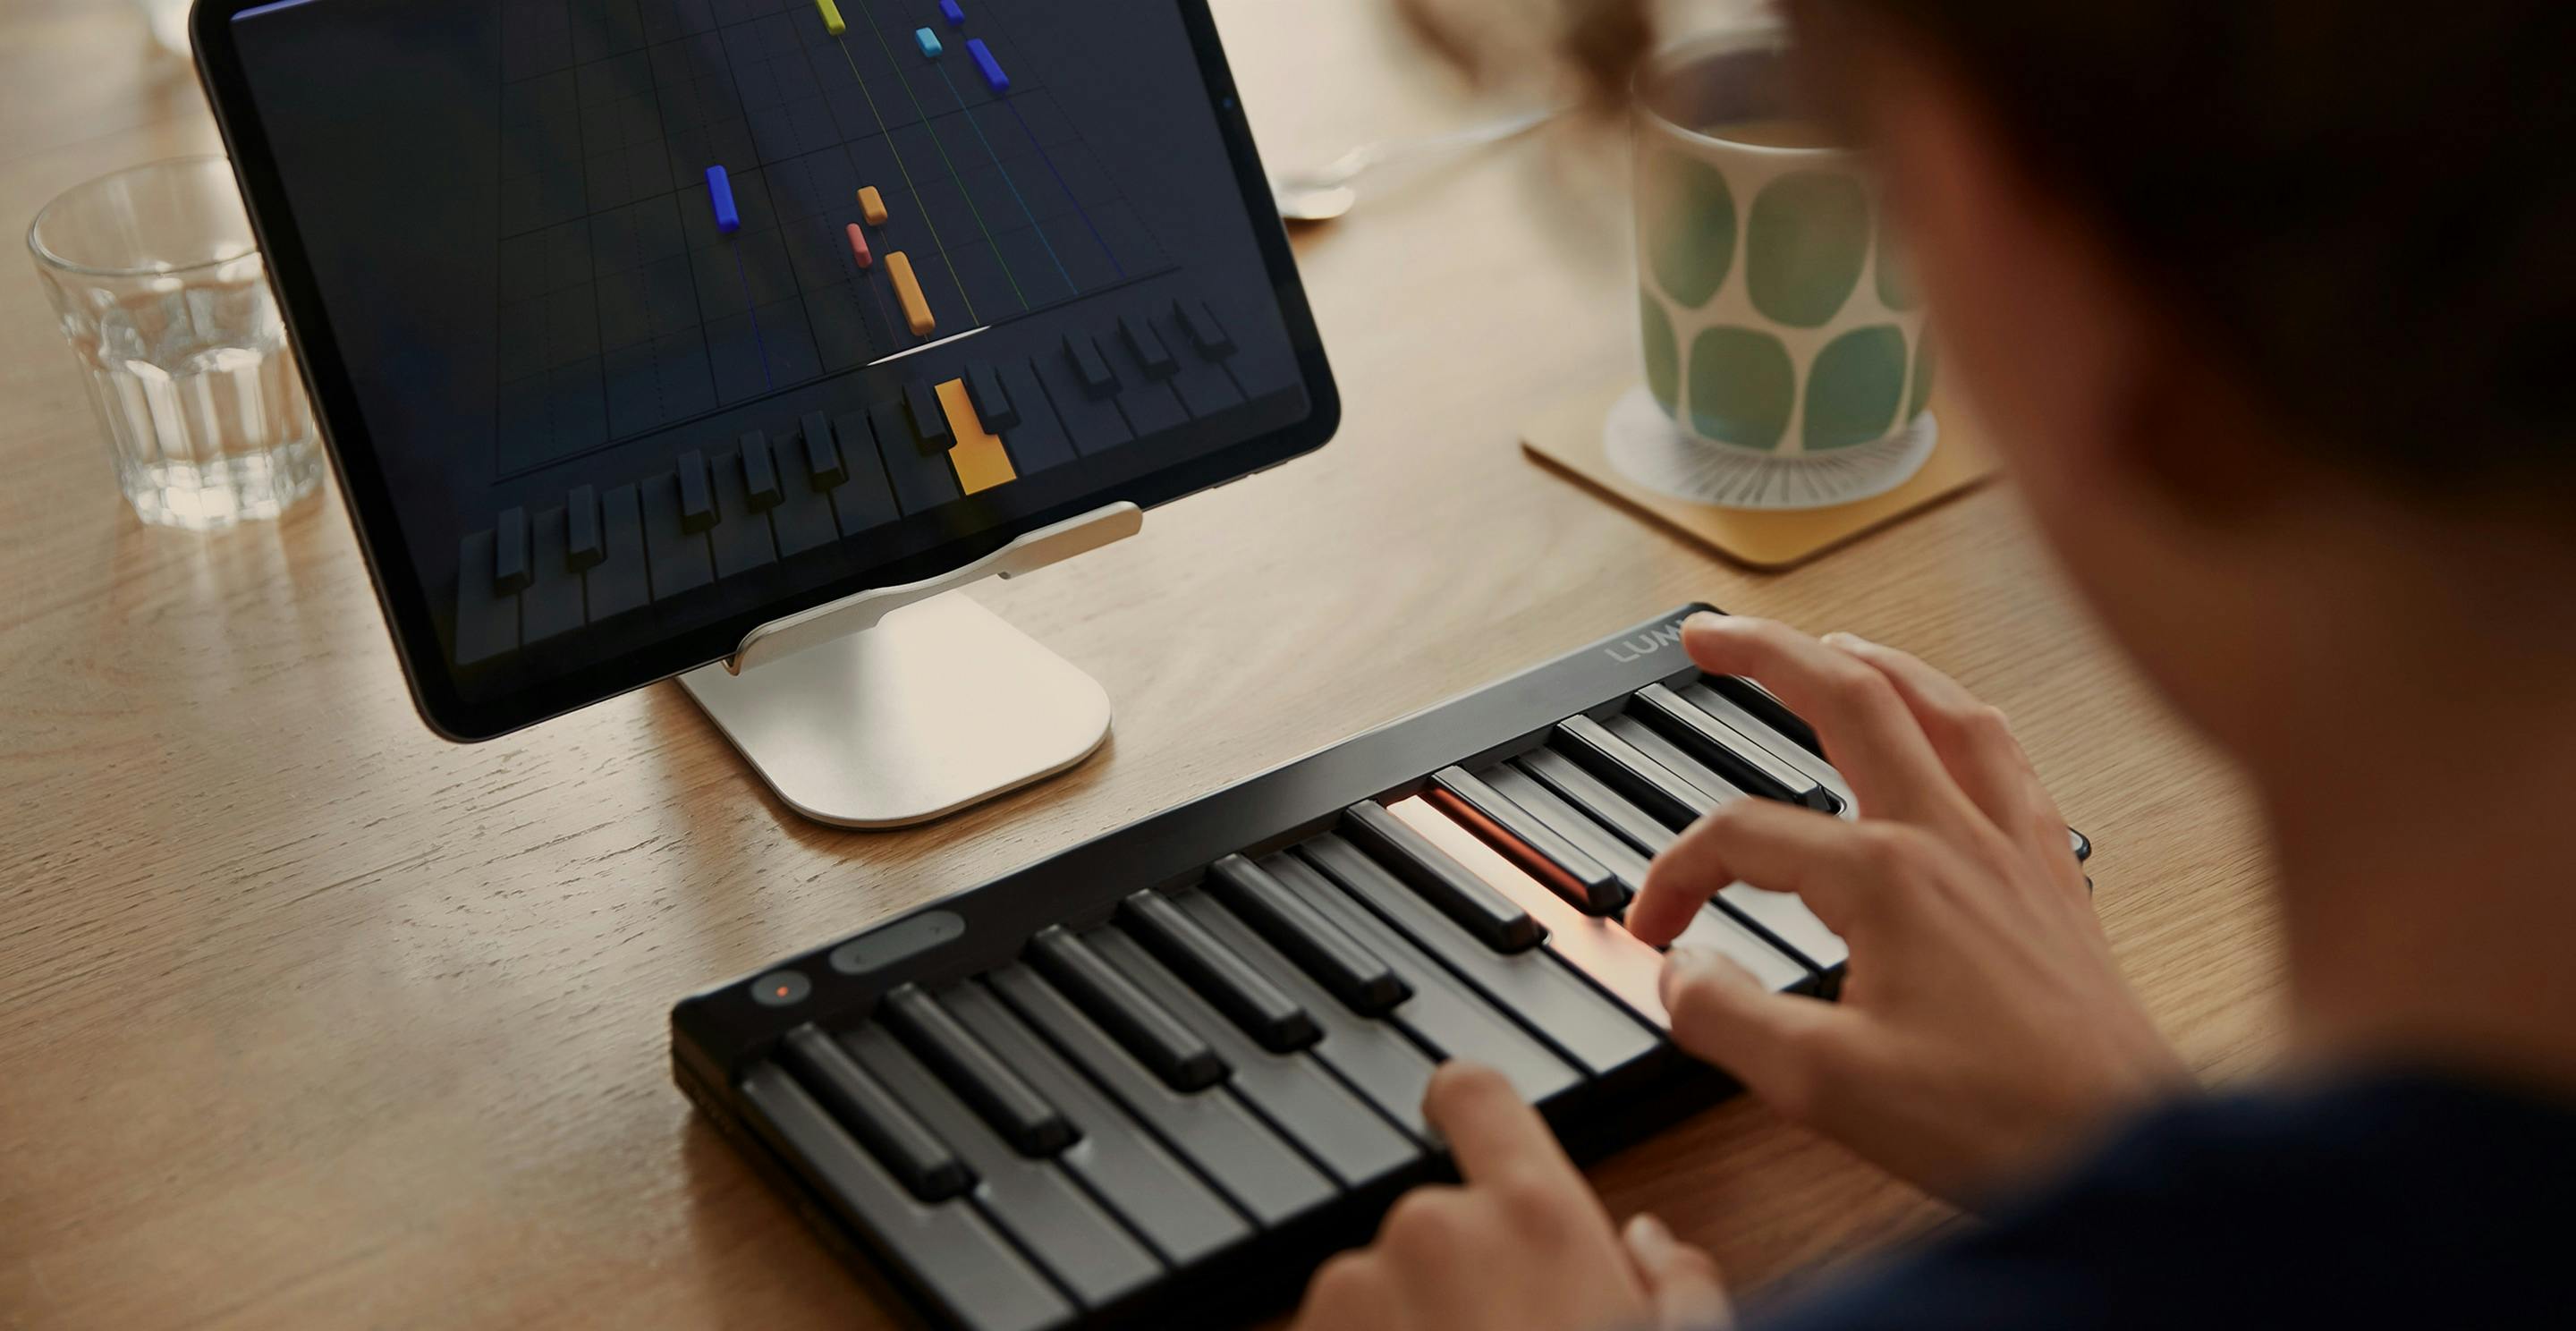 learn piano through sound and vision